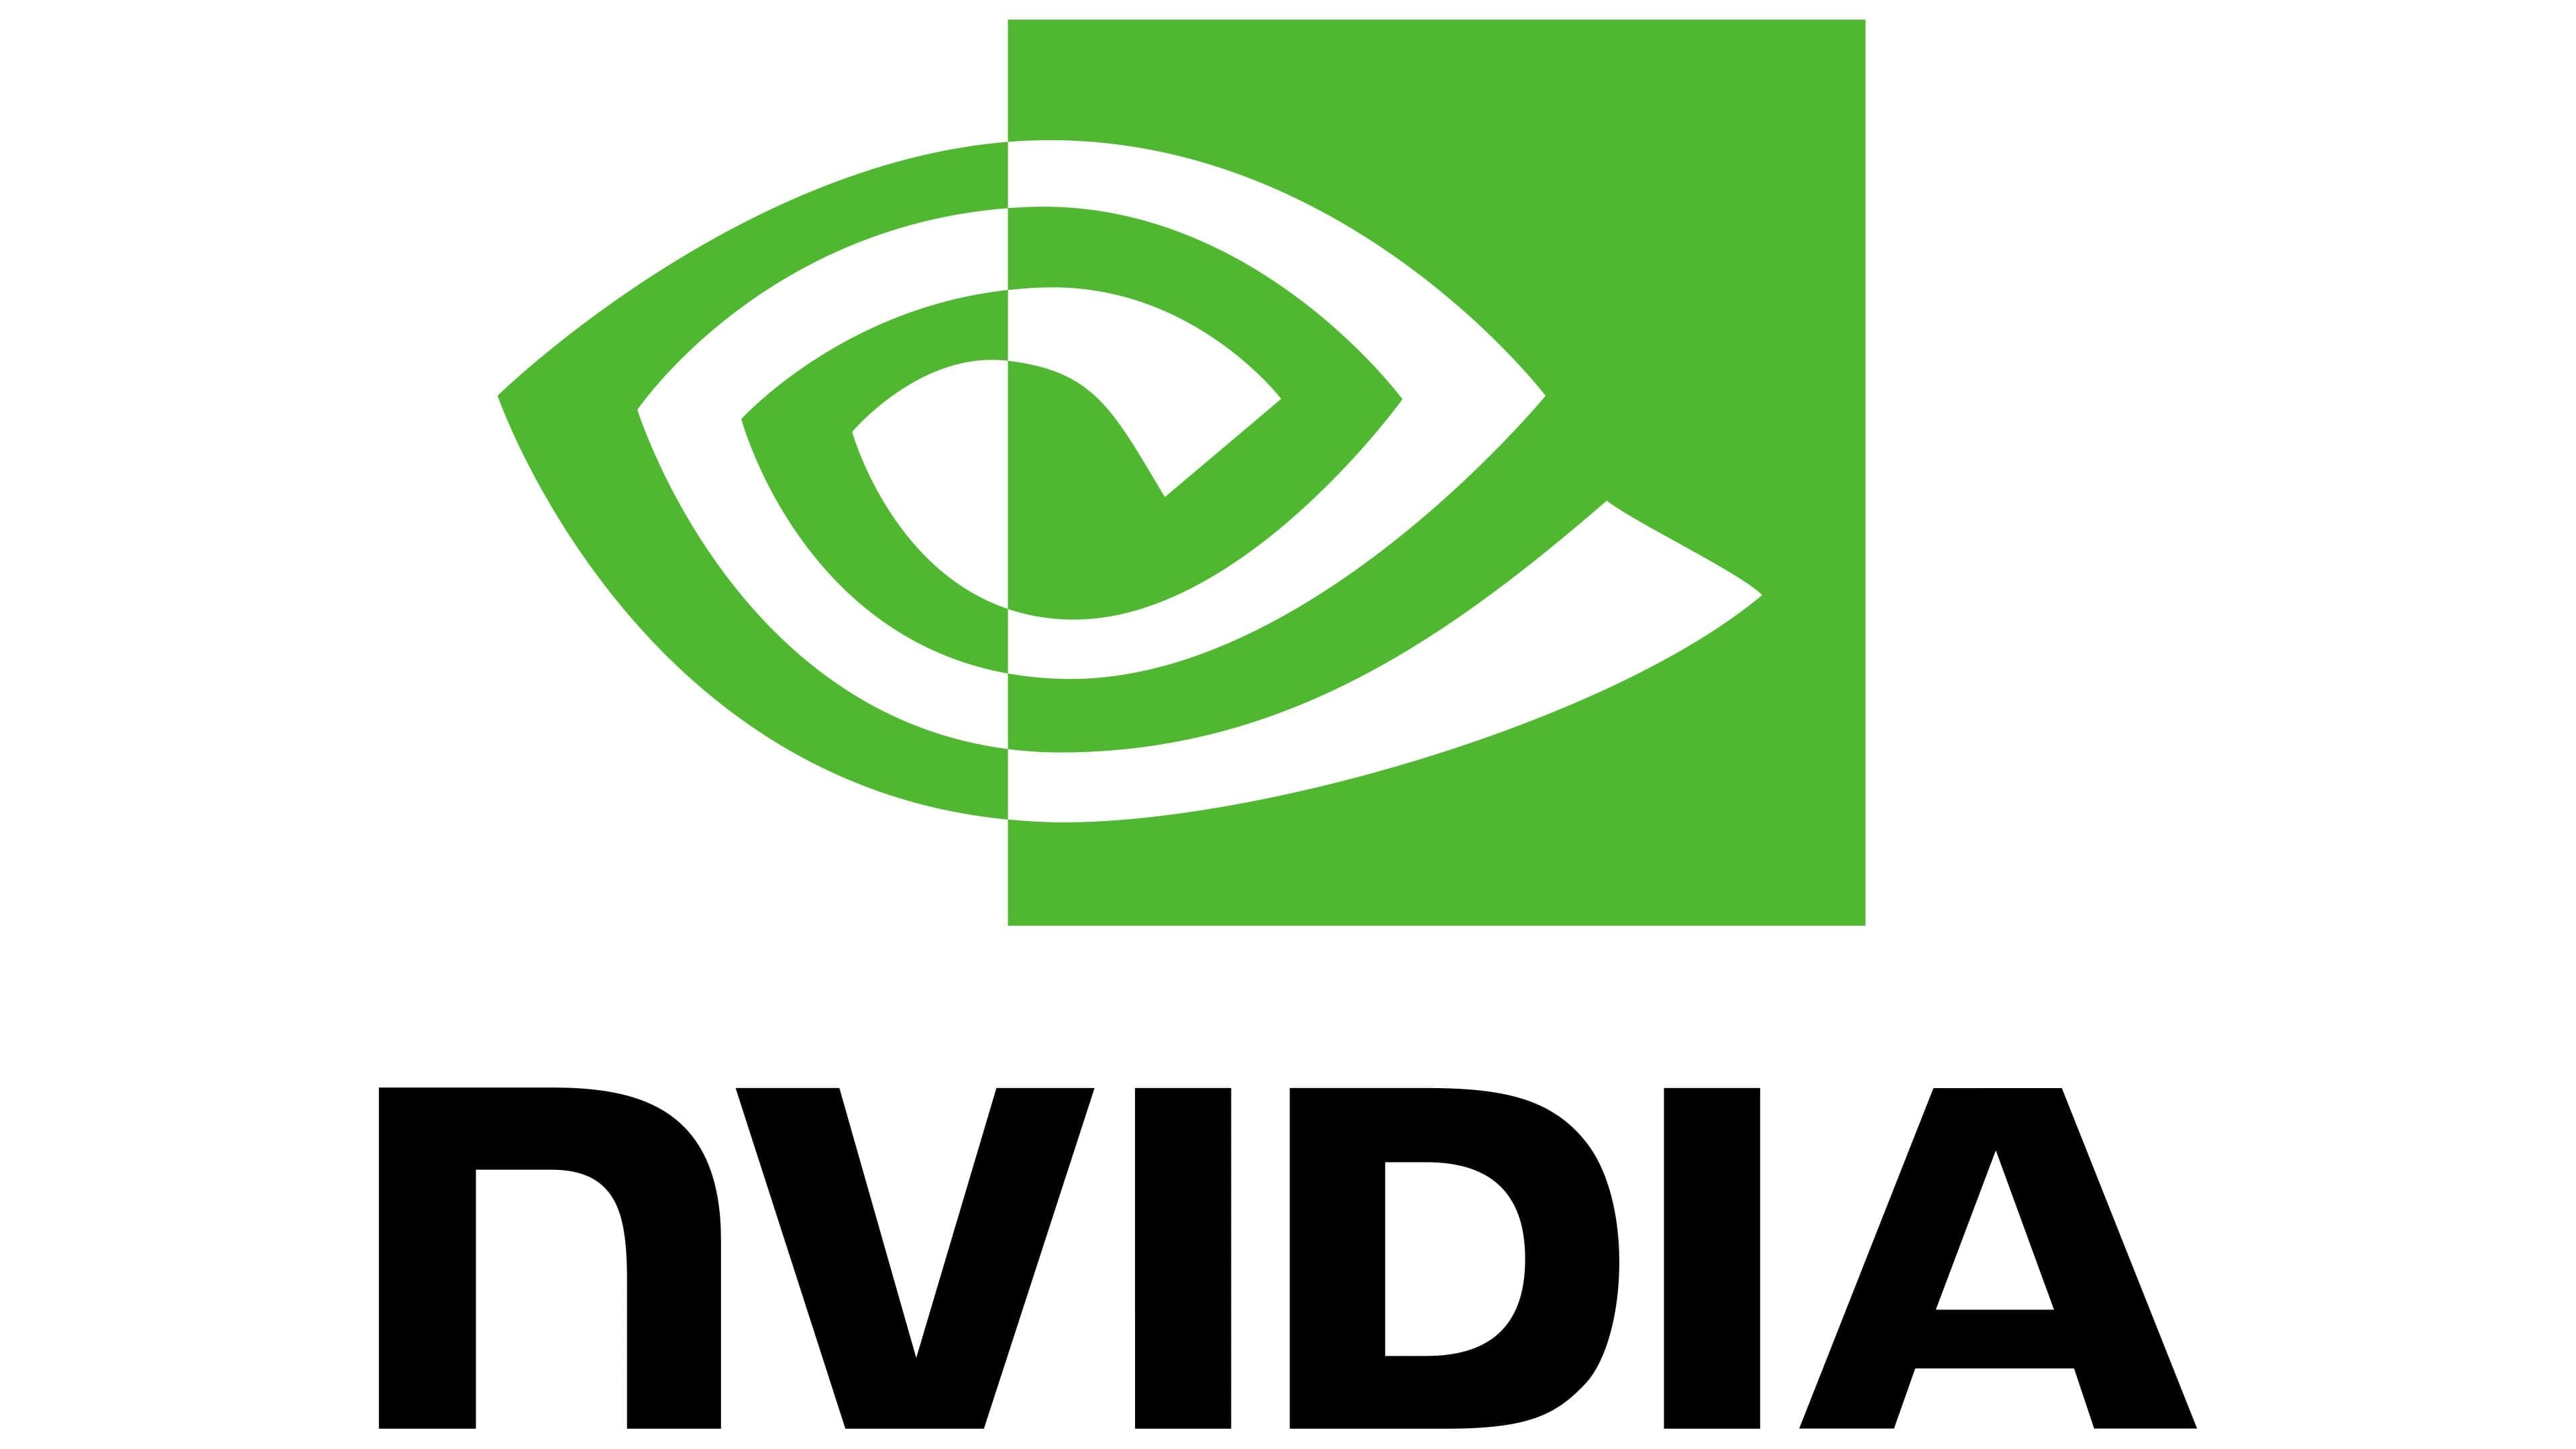 Nvidia: The company was founded in 1993 by three American computer scientists. 3840x2160 4K Wallpaper.